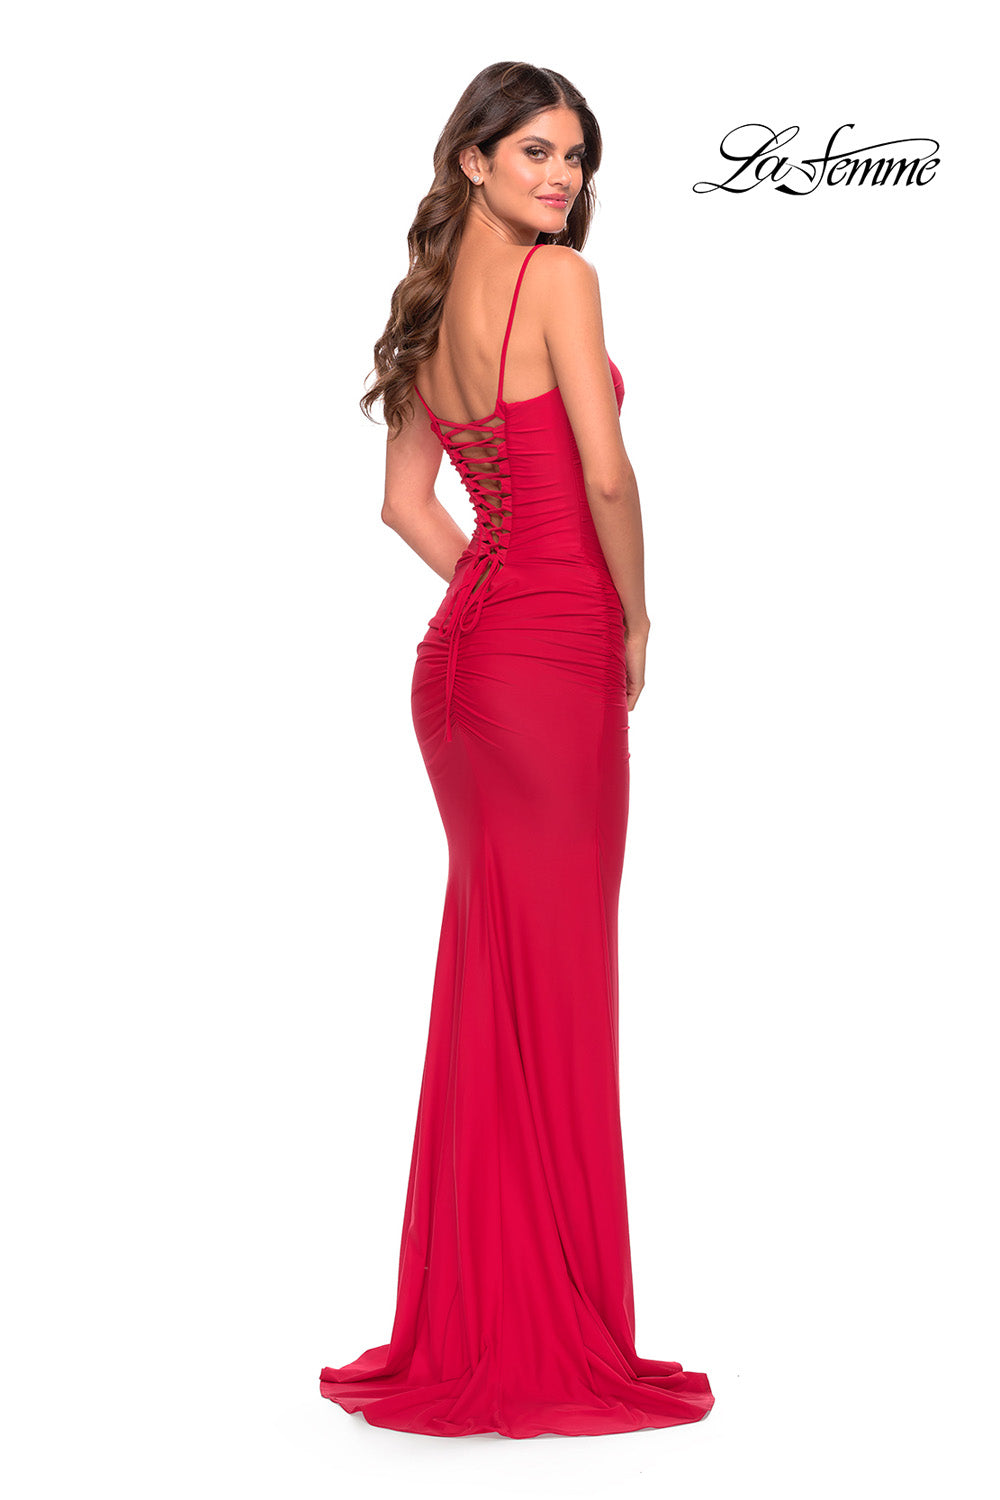 La Femme 31330 prom dress images.  La Femme 31330 is available in these colors: Black, Emerald, Red, Royal Blue.